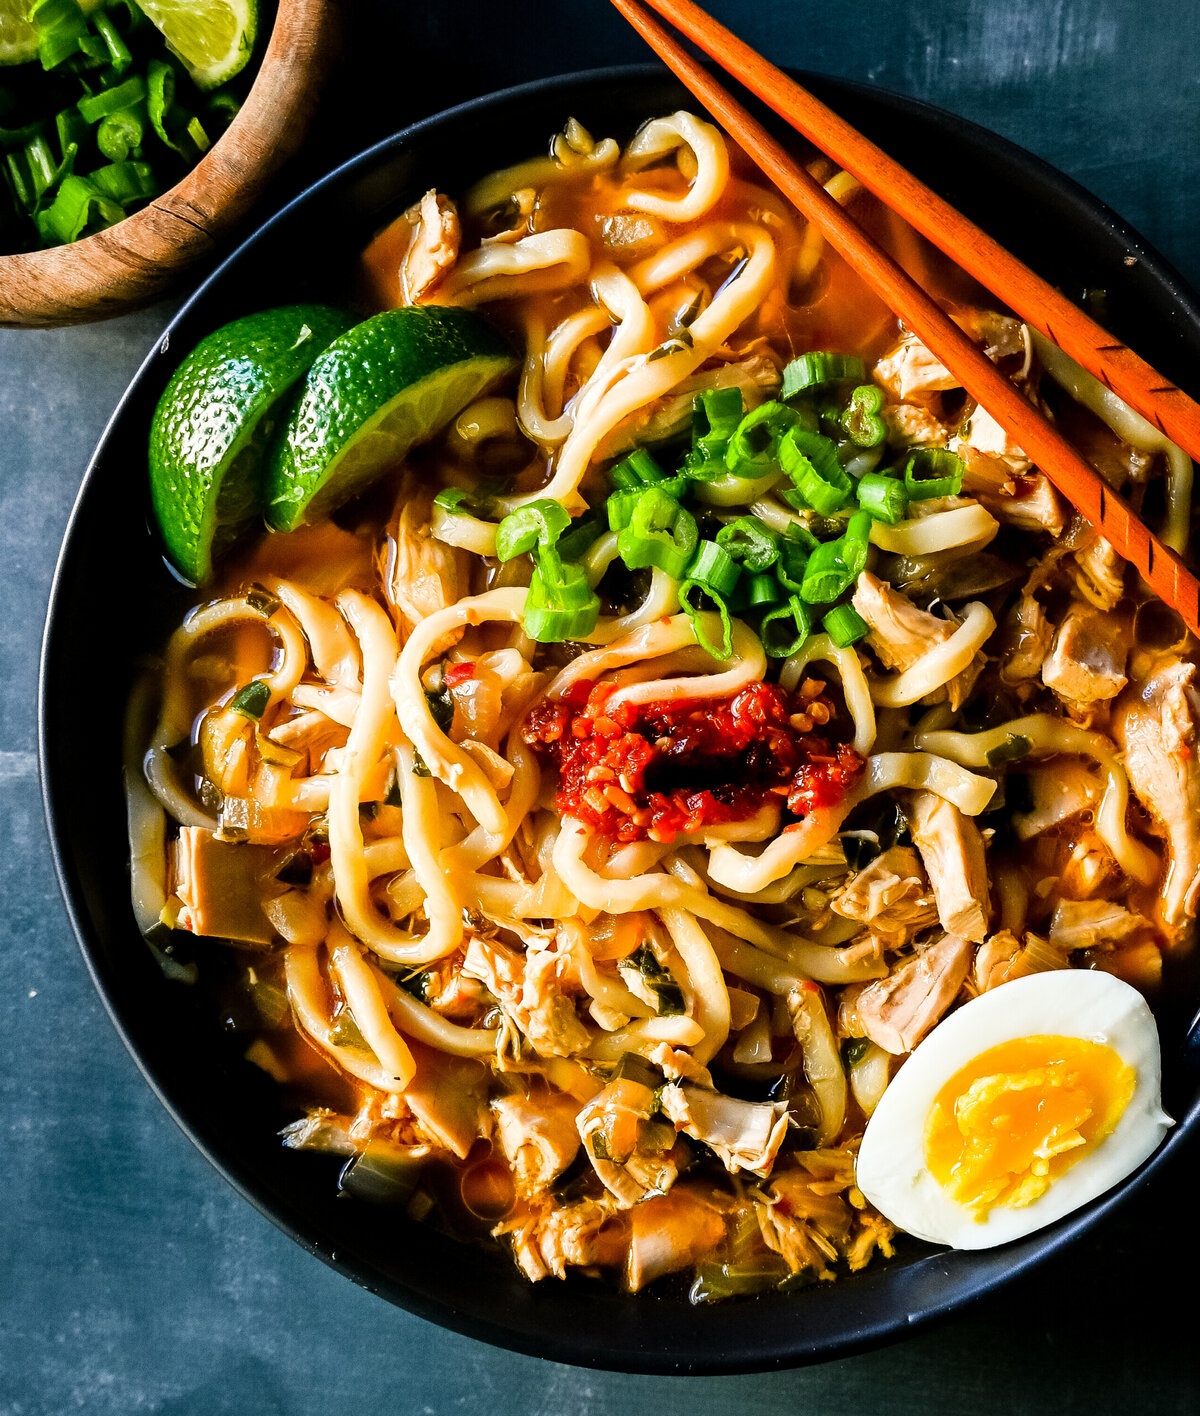 Homemade Chicken Ramen. This warm, comforting bowl of homemade chicken ramen is made with tender chicken, noodles, vegetables, in a perfectly spiced flavorful broth.